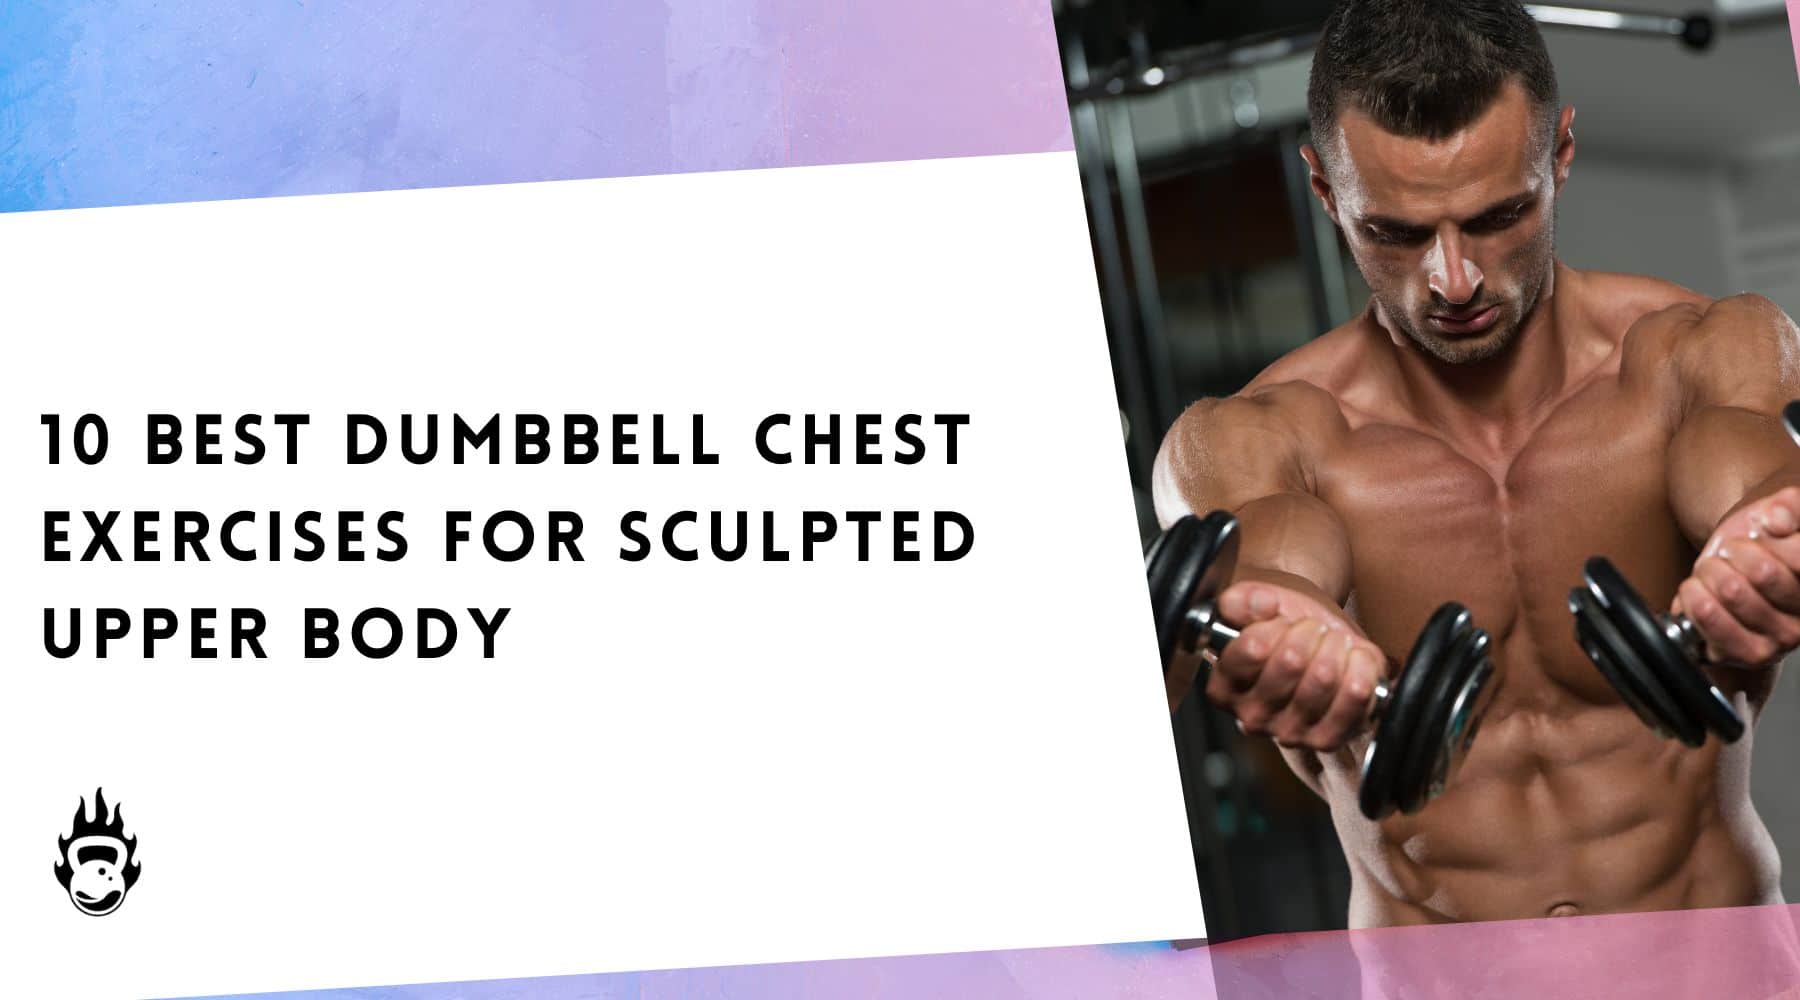 8 Best Chest and bicep workout ideas  workout, workout routine, chest  workouts